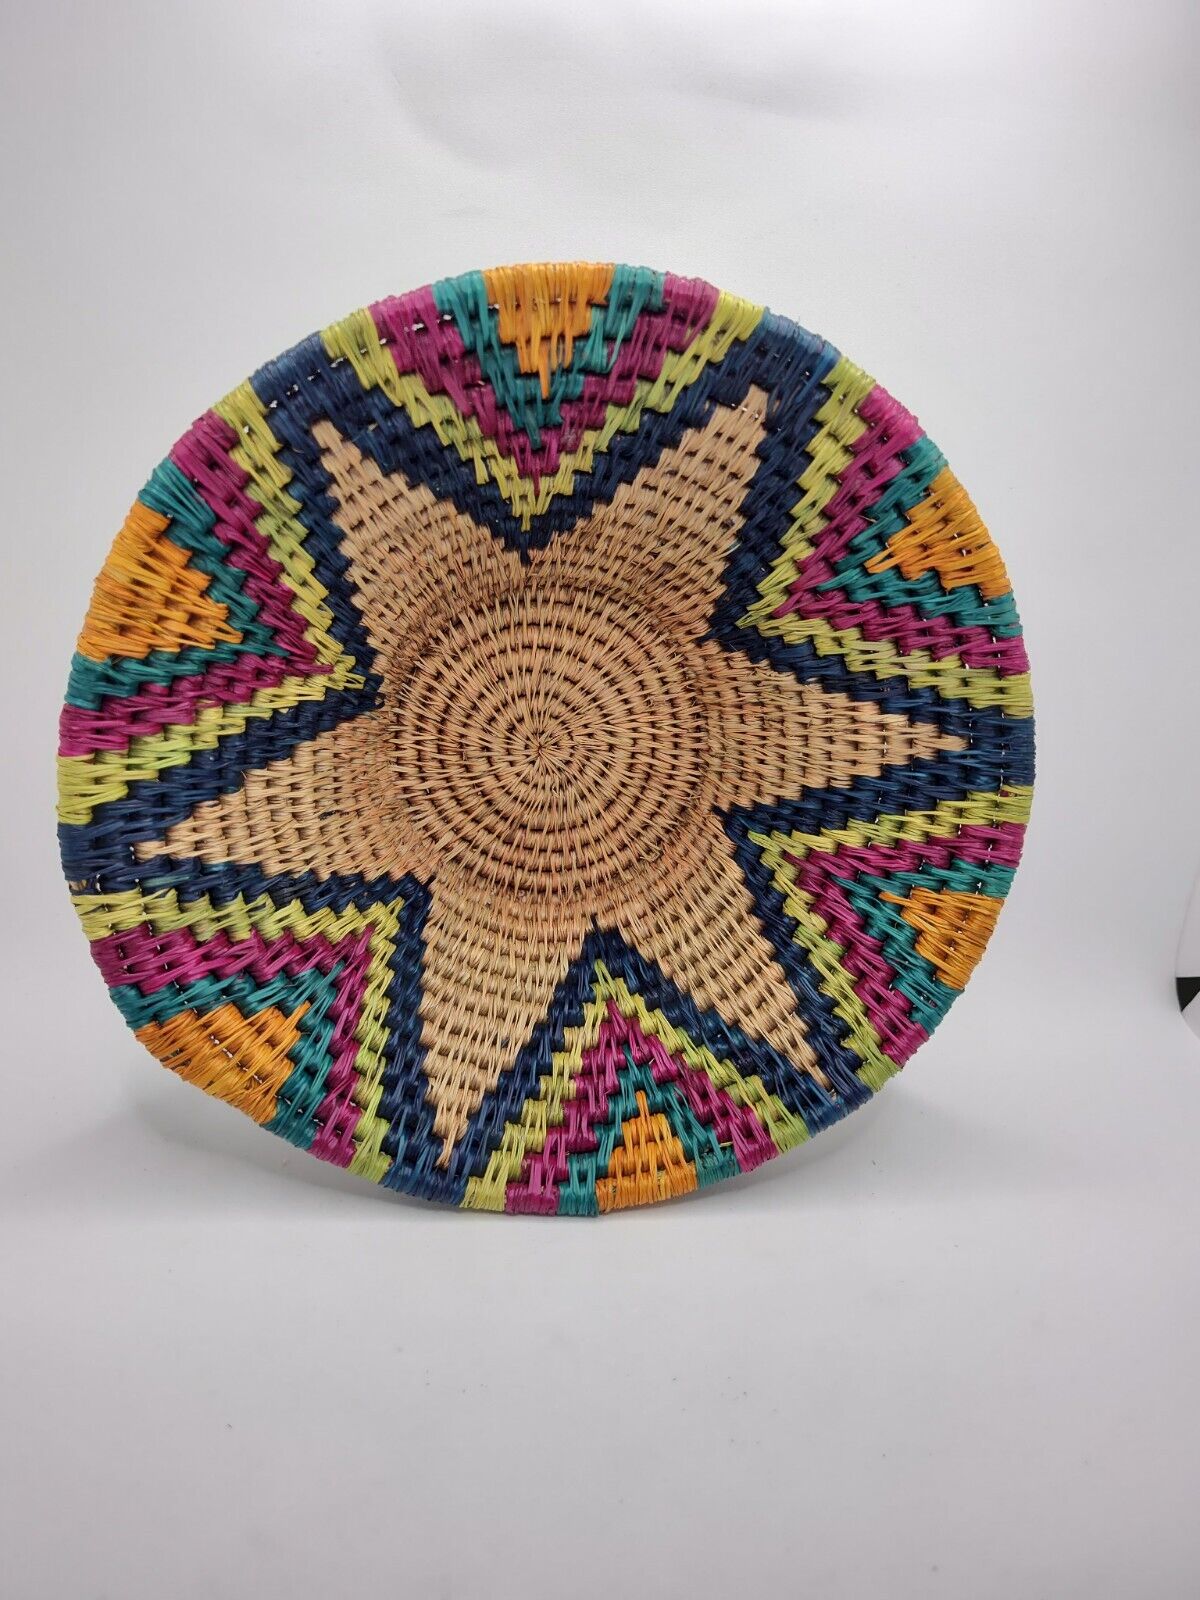 Woven Coiled Multi Colors Basket Bowl Southwestern Style